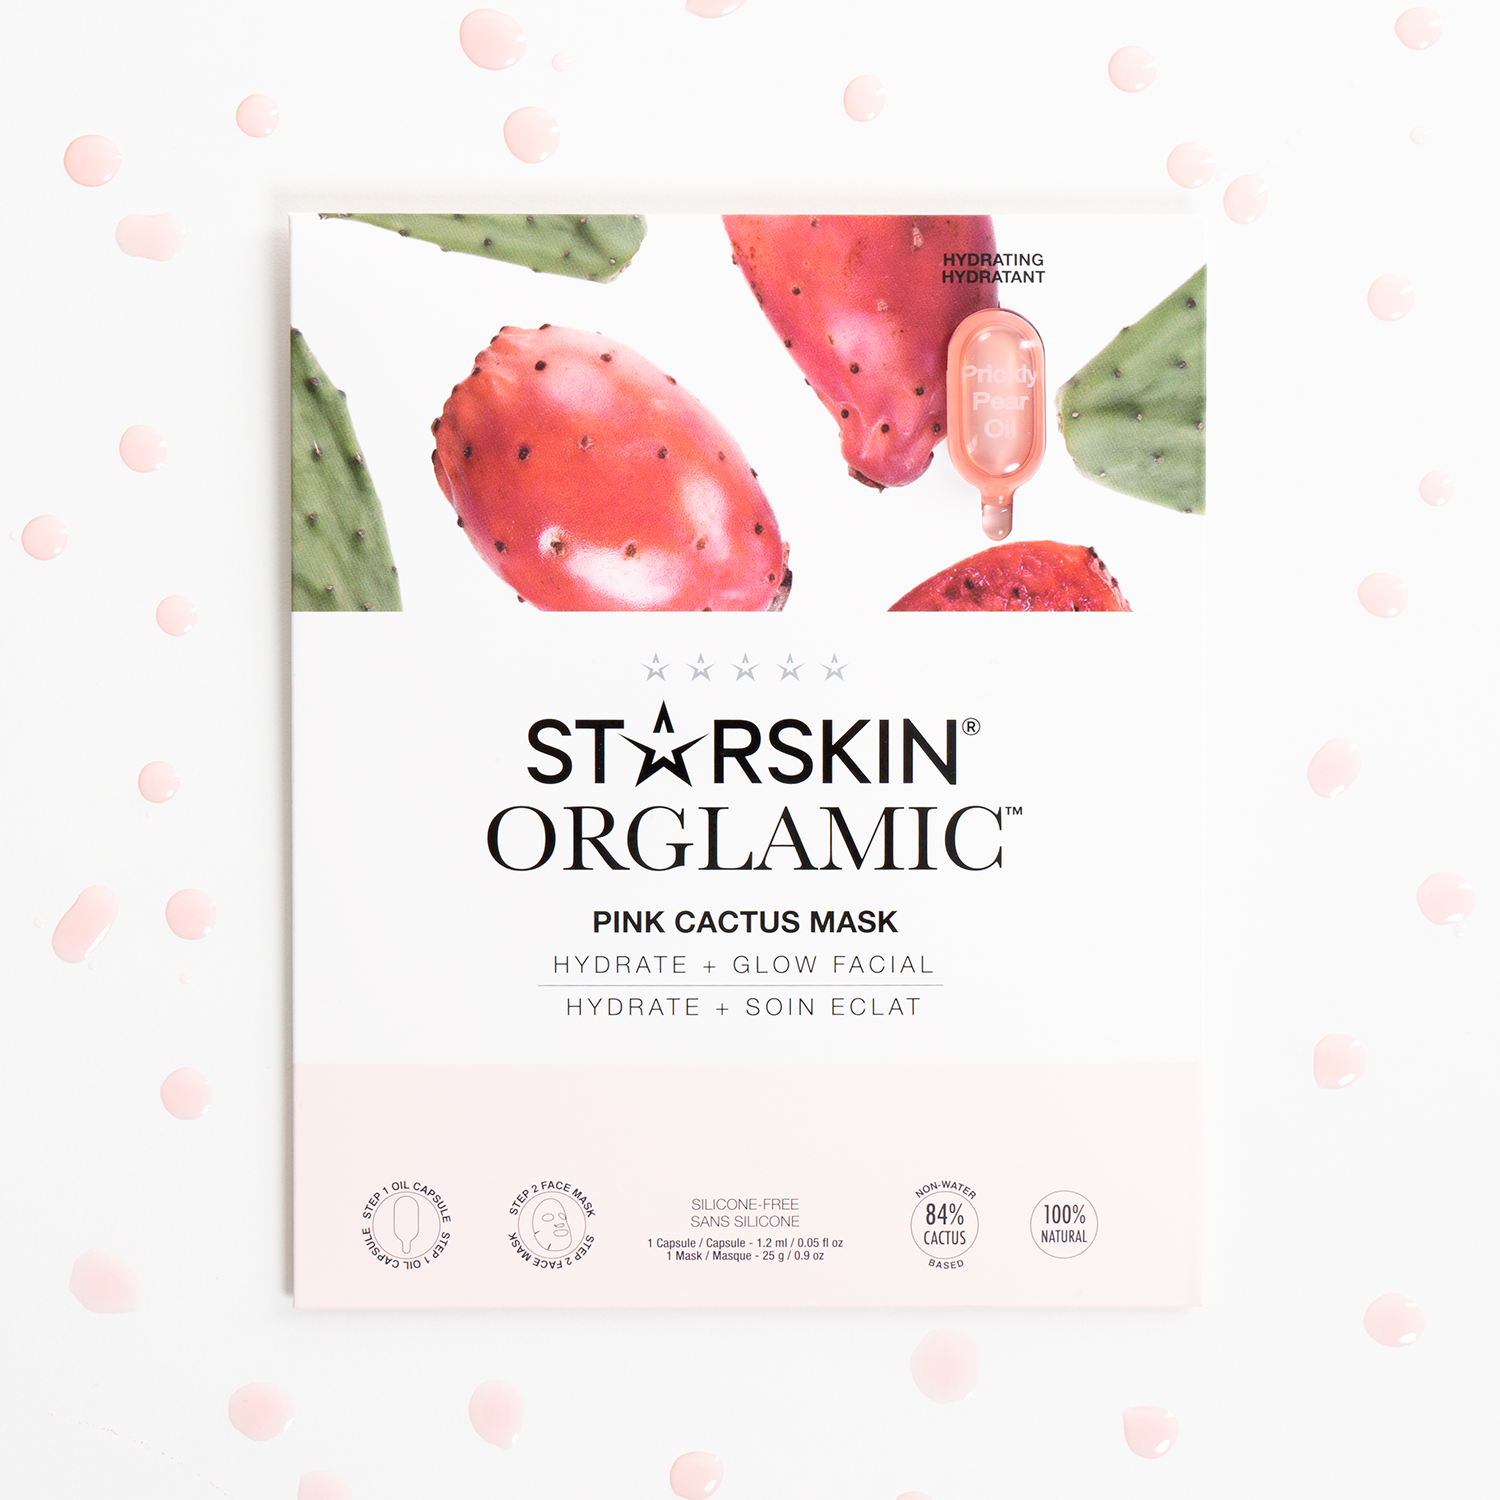 The Pink Cactus Oil Mask product packaging in the middle on a white background. Around the product are drops of the prickly pear oil.